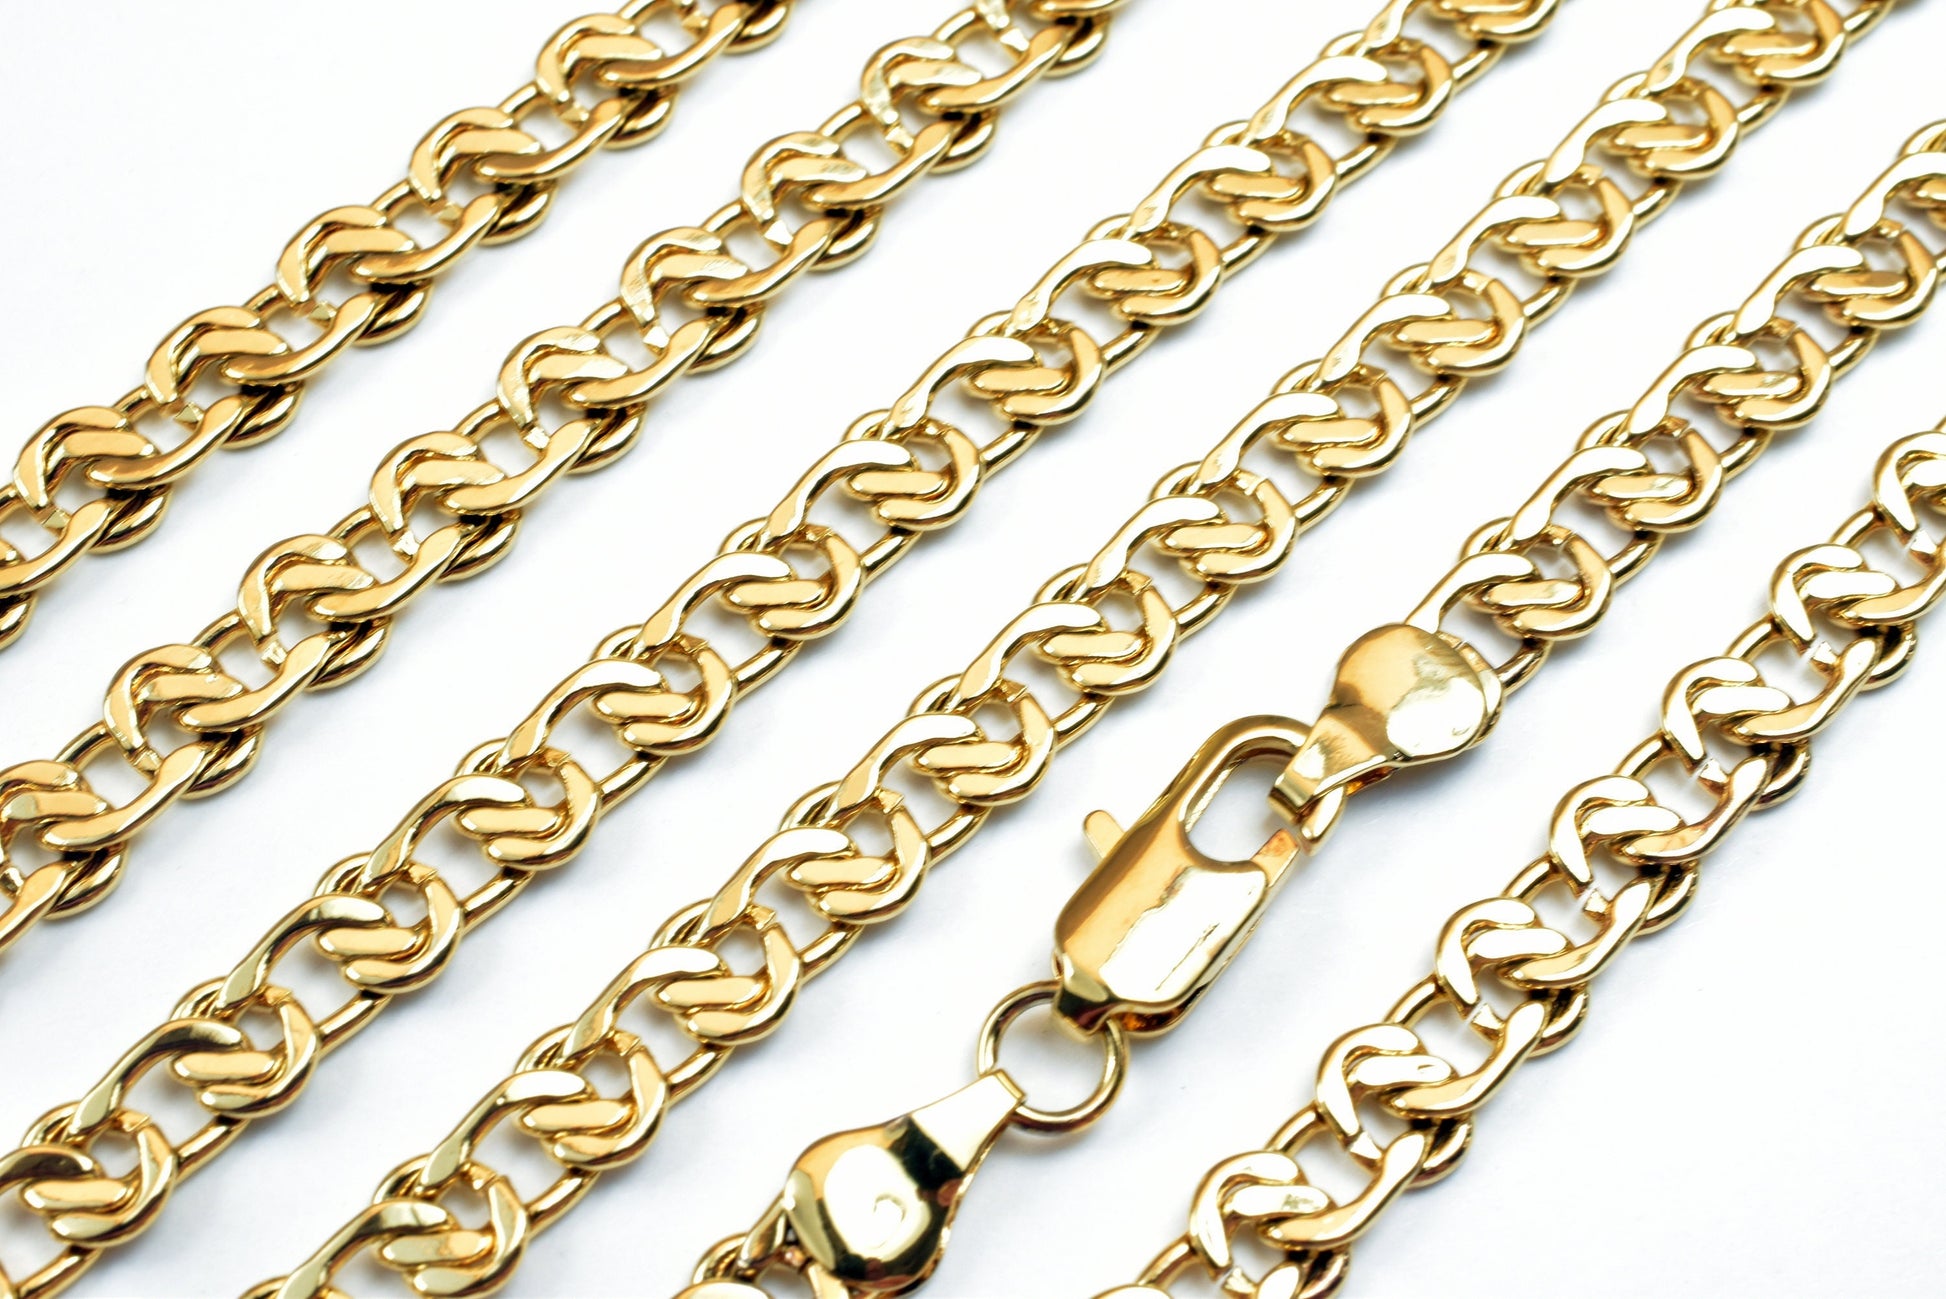 18k gold filled EP link chain 19 1/2" inch long, 6mm width, 2mm thickness gold filled findings chain for jewelry making cg497